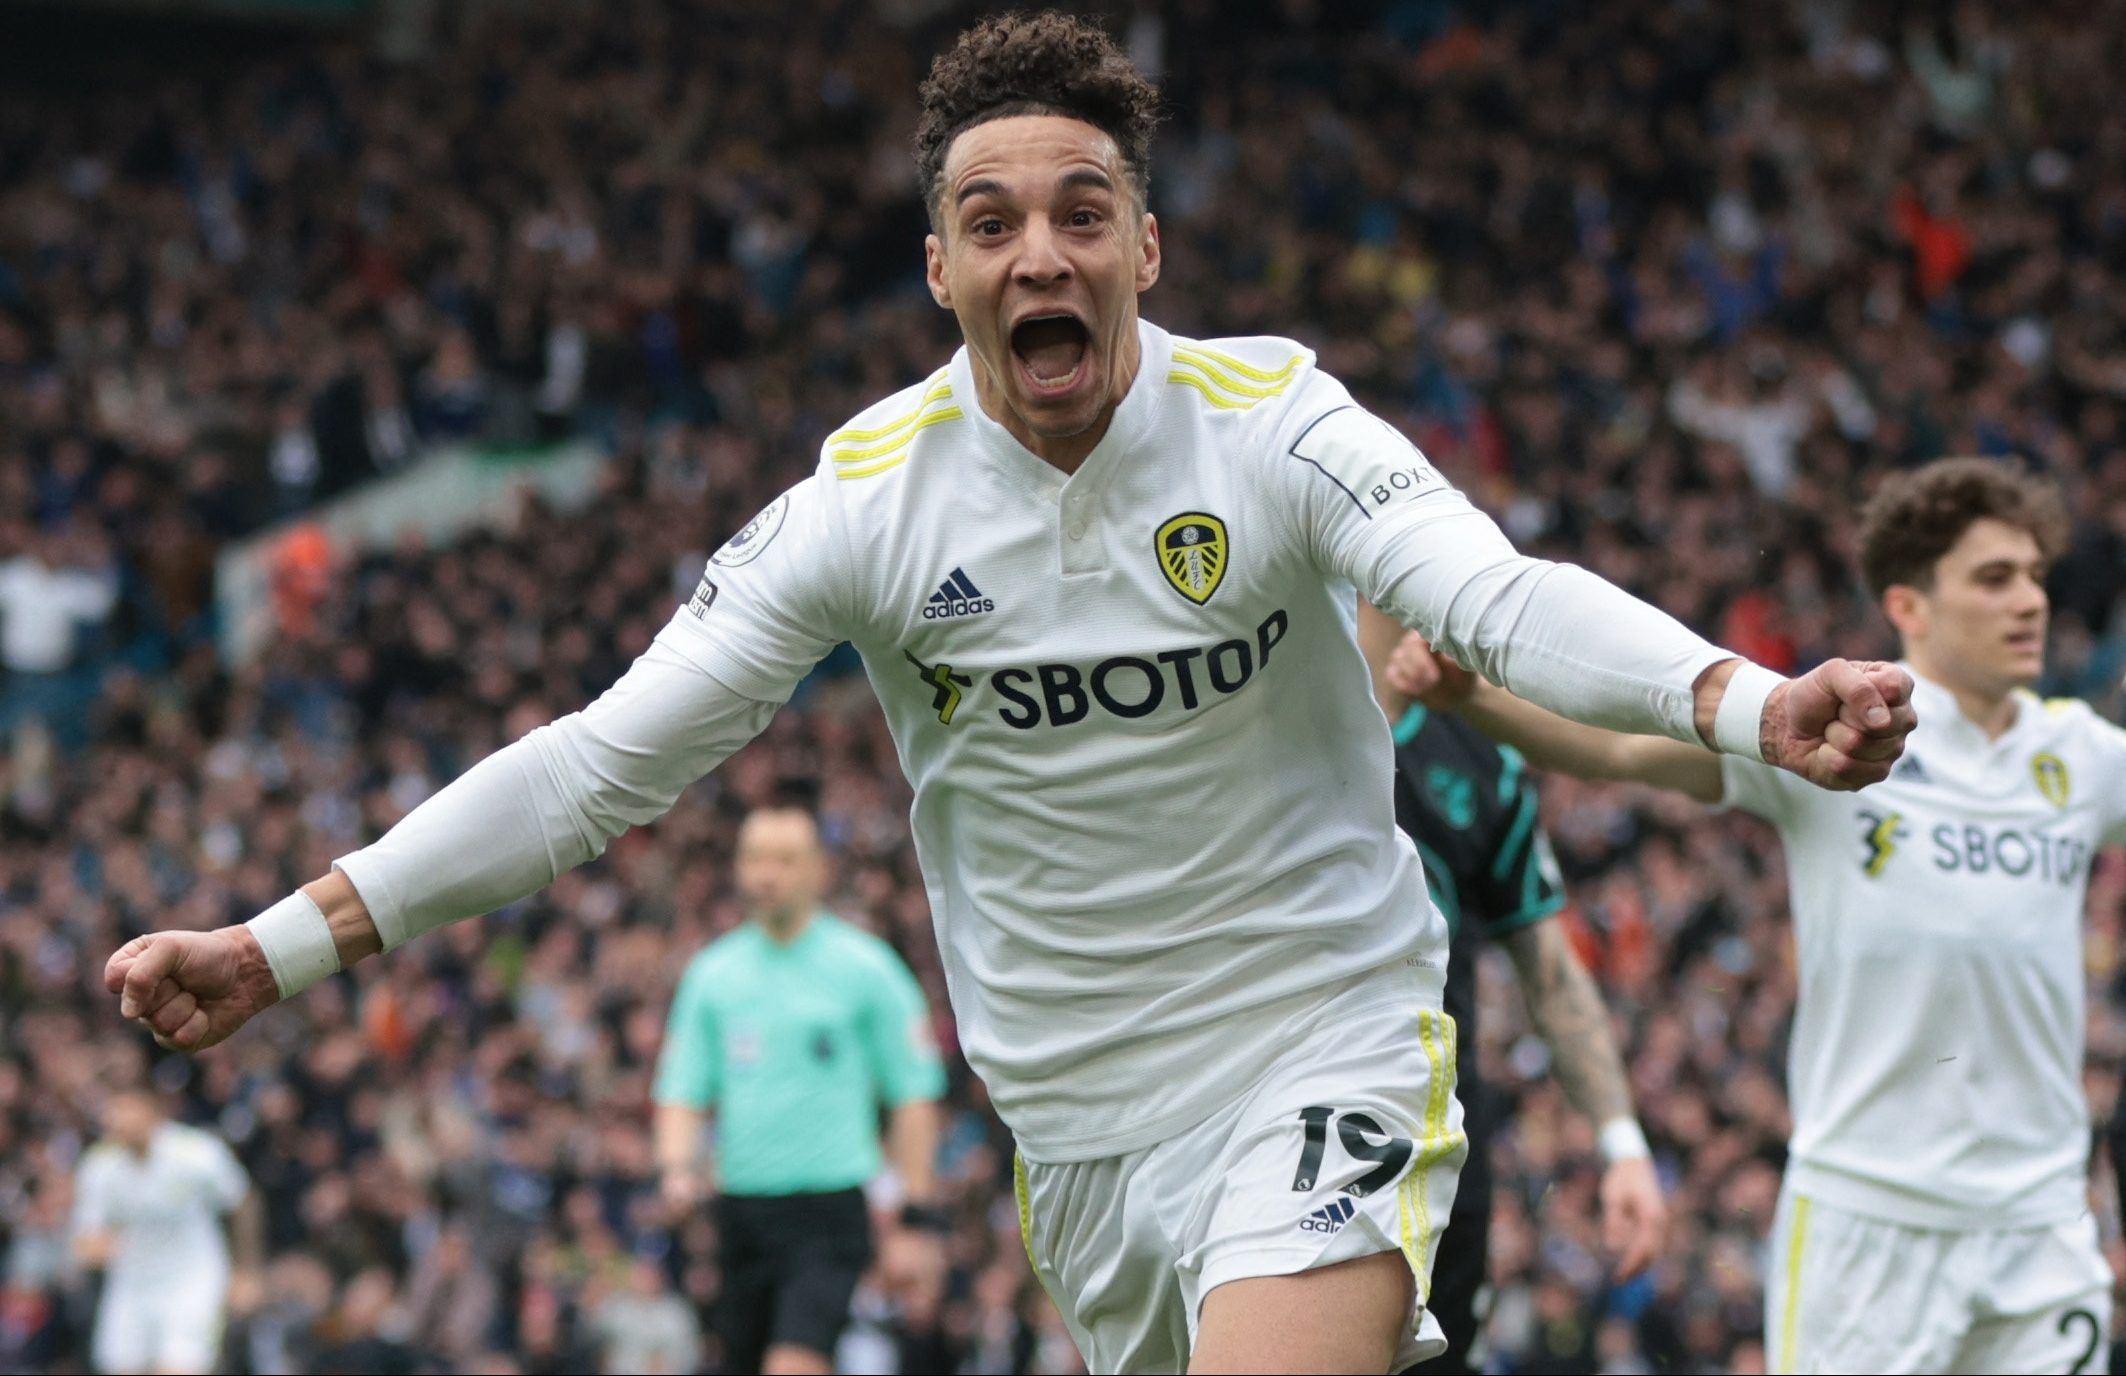 Soccer Football - Premier League - Leeds United v Norwich City - Elland Road, Leeds, Britain - March 13, 2022 Leeds United's Rodrigo celebrates scoring their first goal Action Images via Reuters/Lee Smith EDITORIAL USE ONLY. No use with unauthorized audio, video, data, fixture lists, club/league logos or 'live' services. Online in-match use limited to 75 images, no video emulation. No use in betting, games or single club /league/player publications.  Please contact your account representative fo